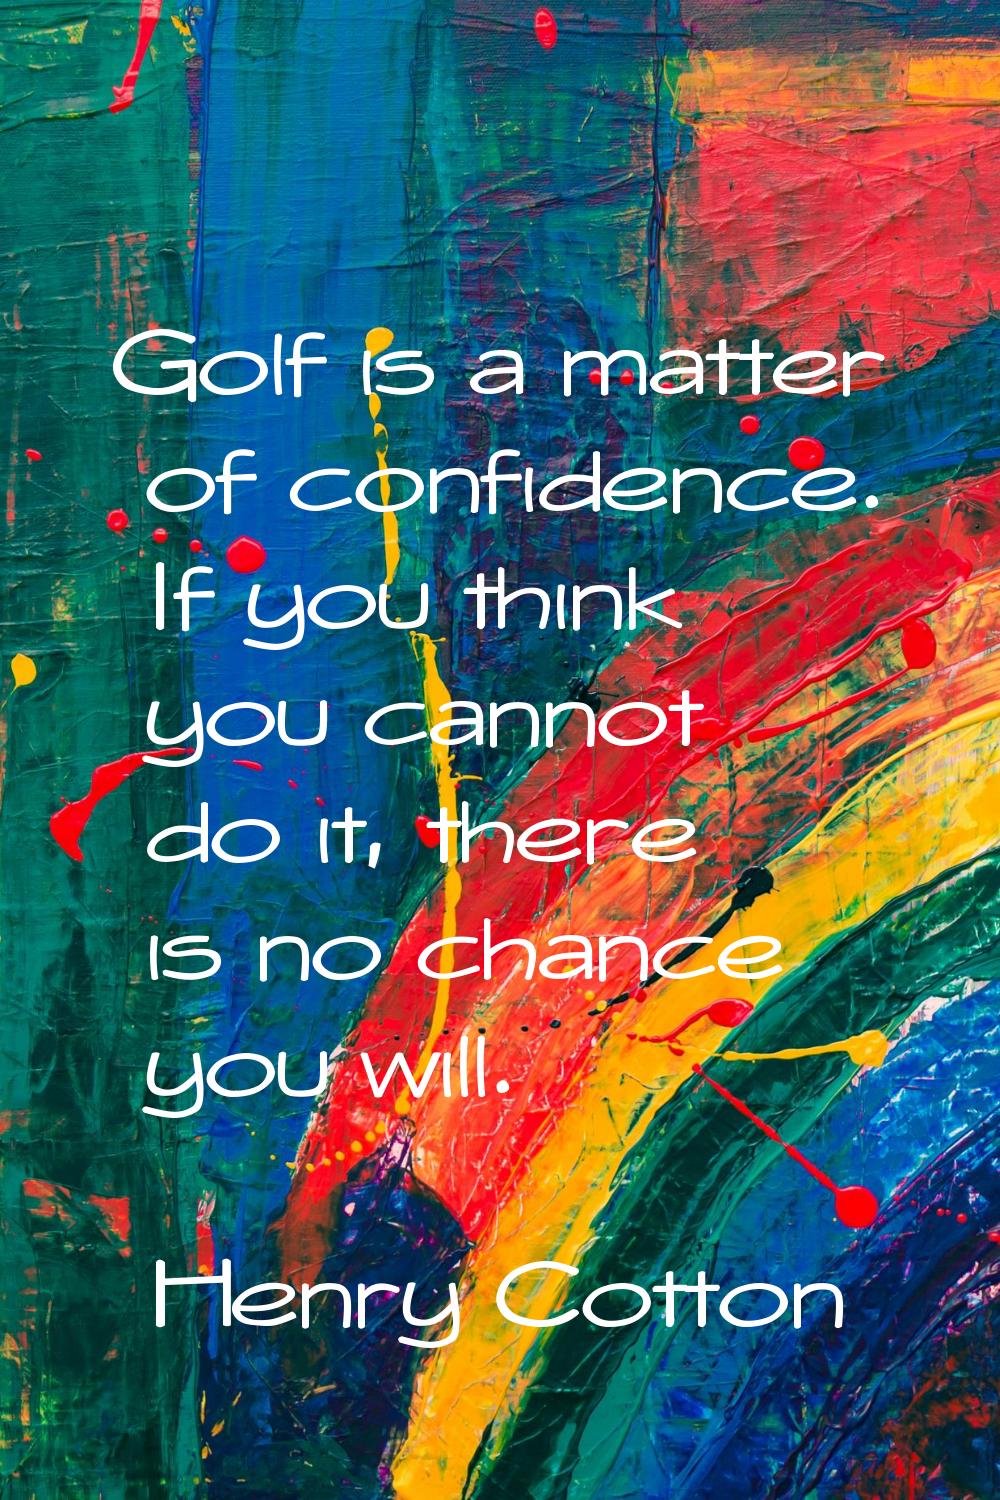 Golf is a matter of confidence. If you think you cannot do it, there is no chance you will.